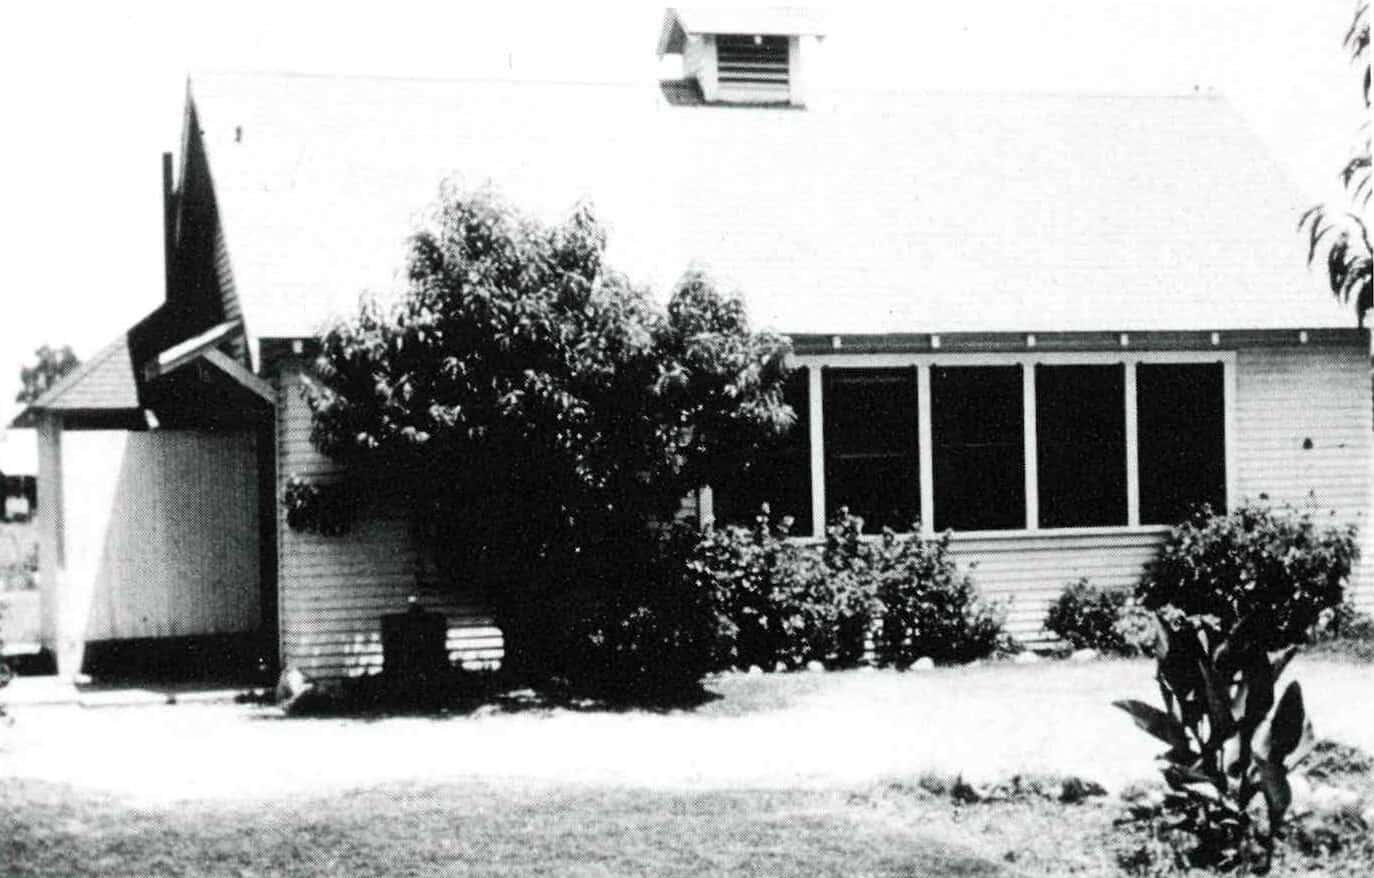 Ontario Christian School began as a one-room schoolhouse based in a converted garage.